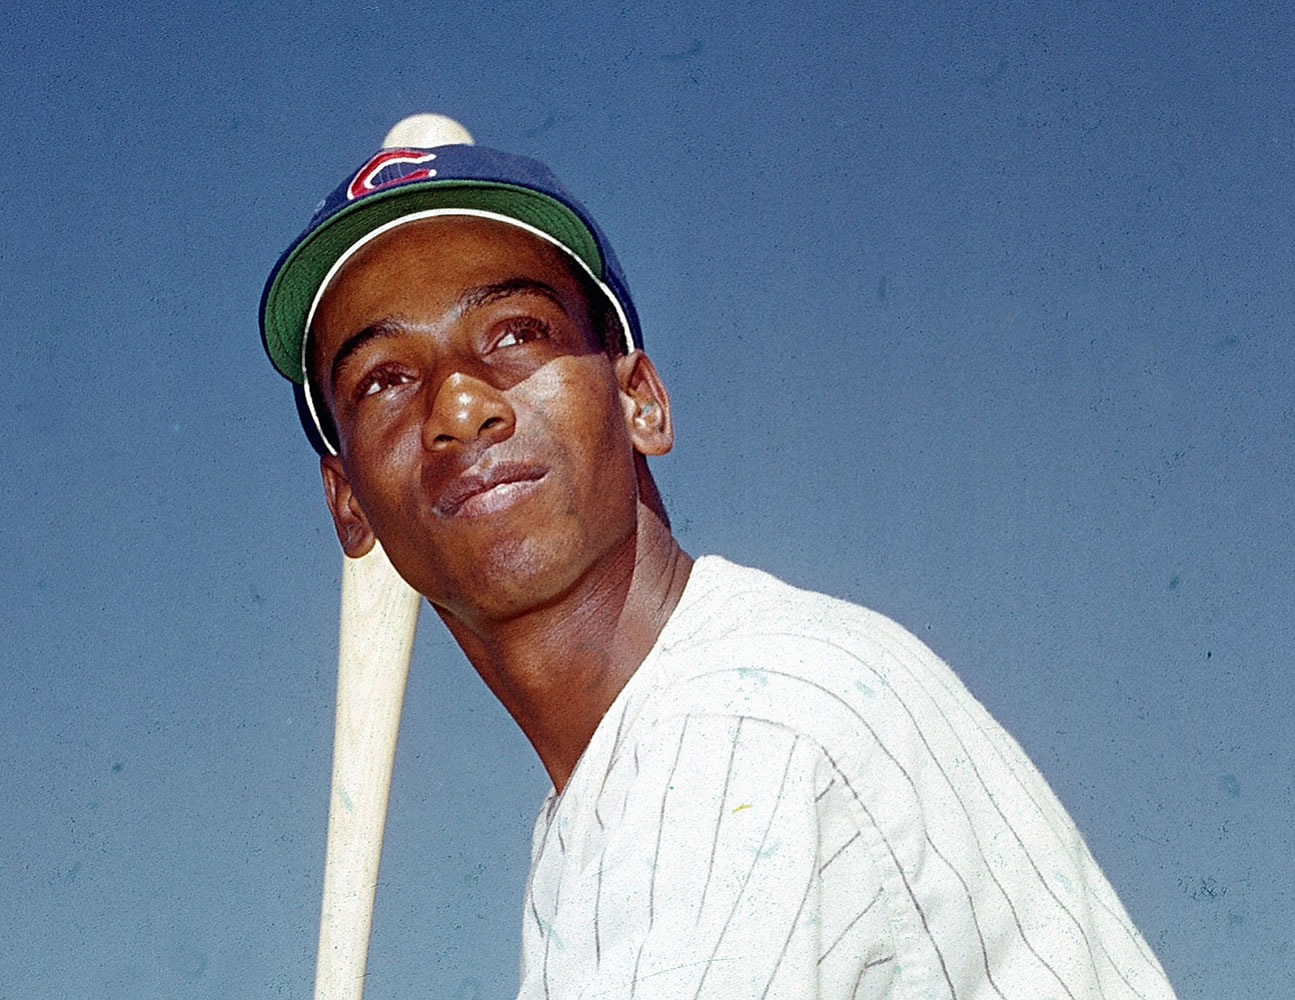 Chicago Cubs legend Ernie Banks pictured in 1970. The Cubs announced Friday night, Jan. 23, 2015, that Banks had died. He was 83.